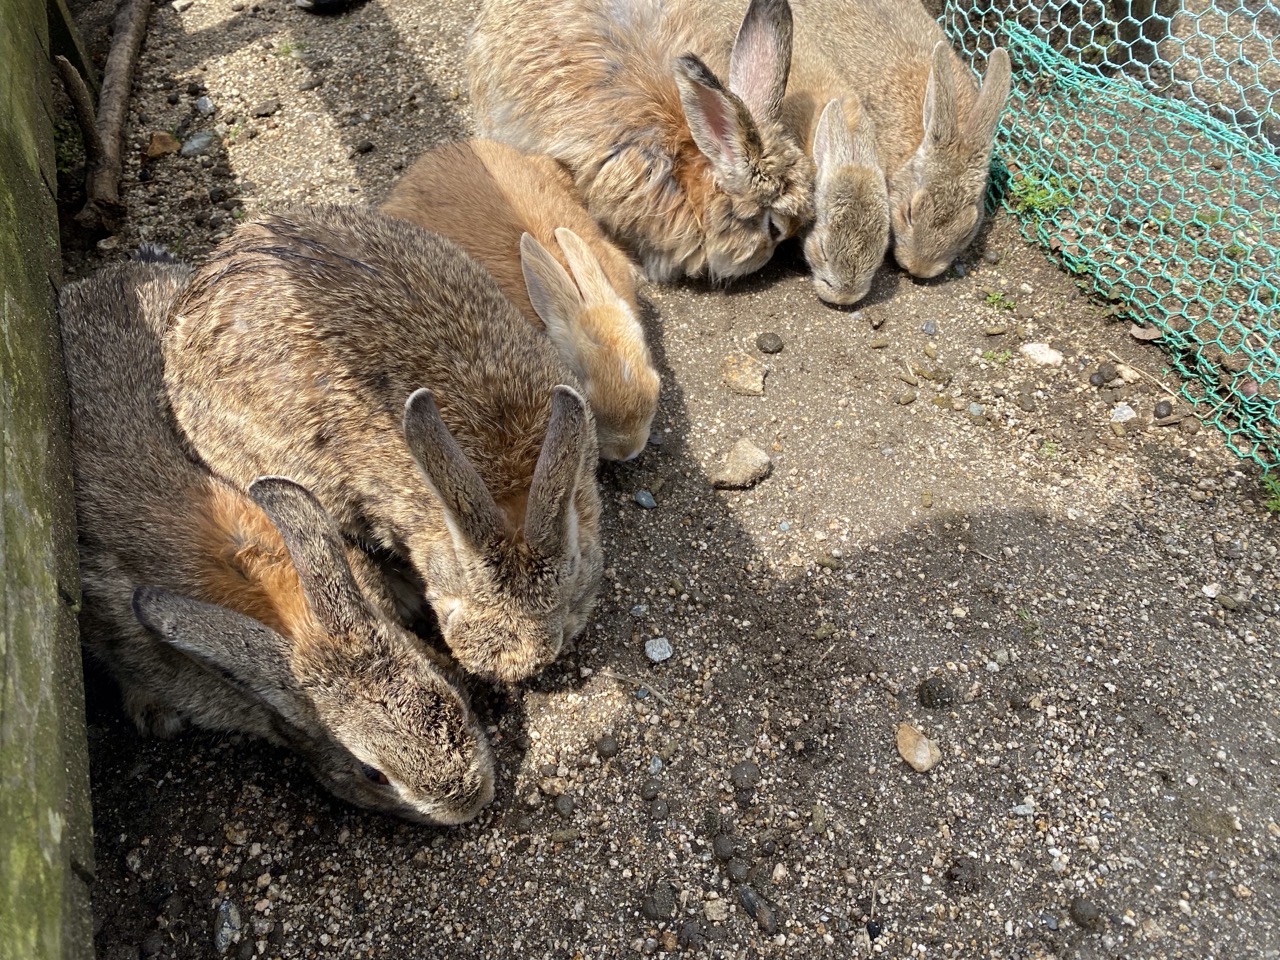 Some rabbits munching on the food we gave them.